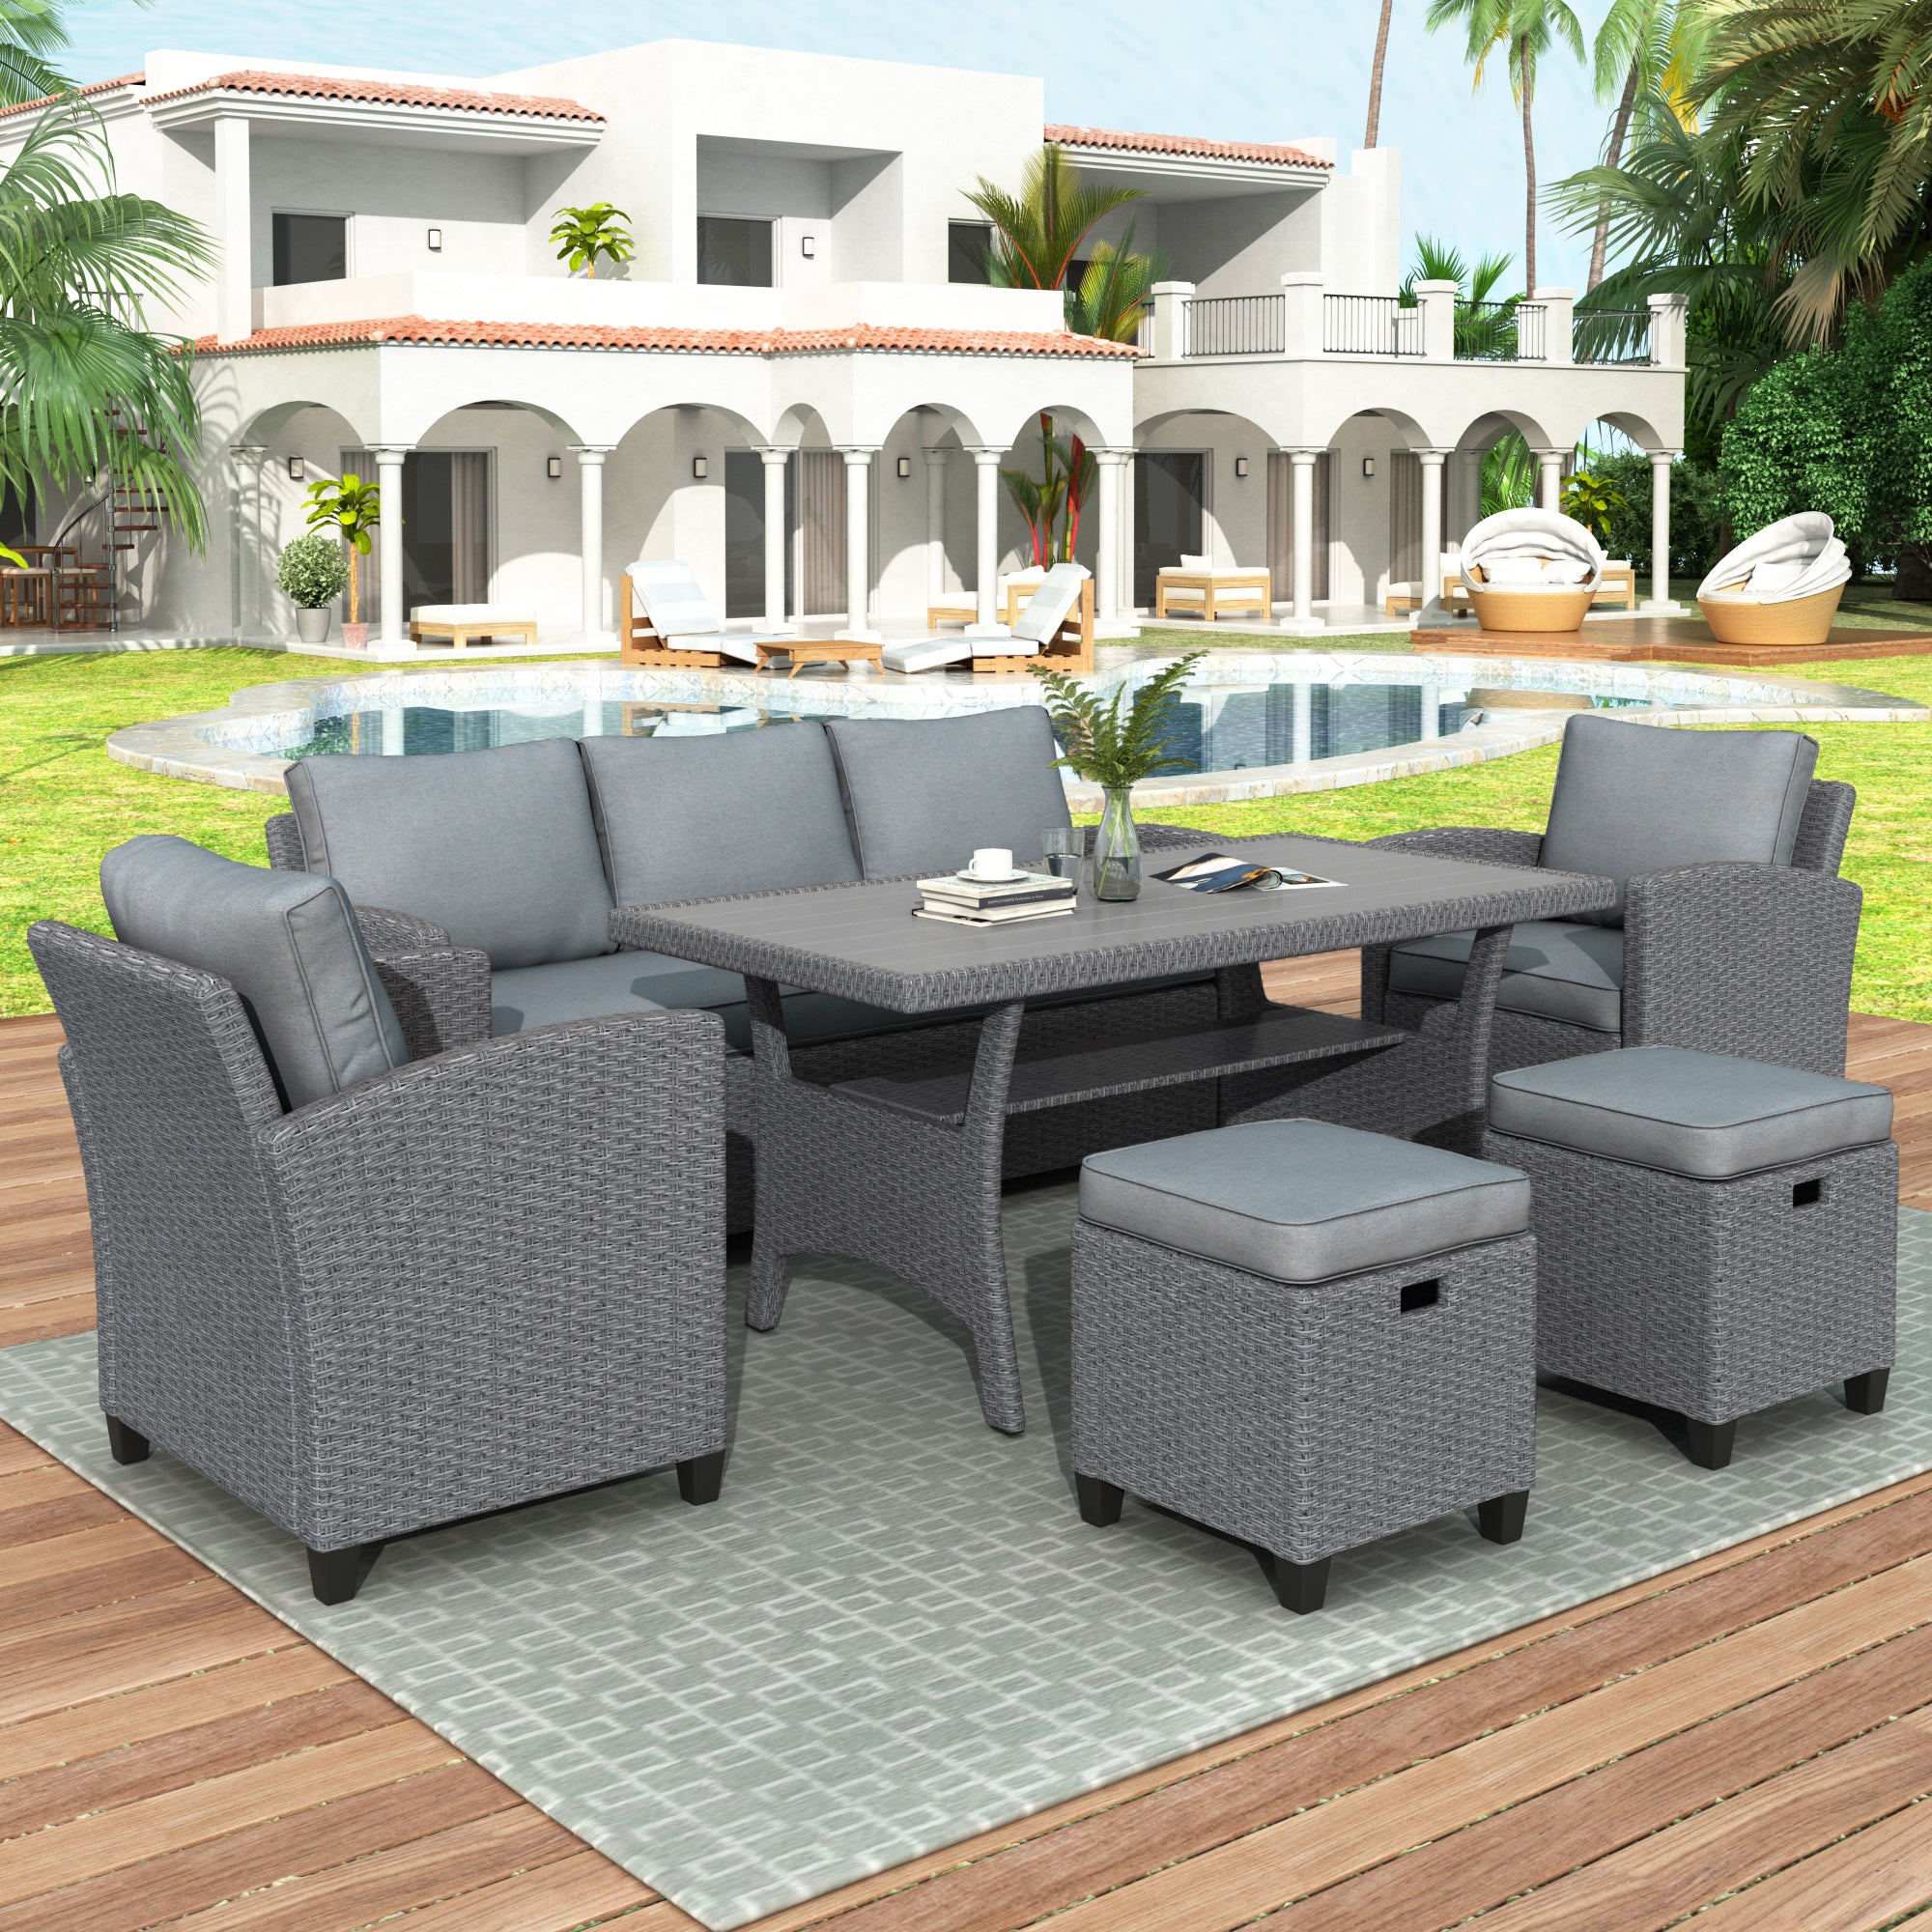 6-Piece Outdoor Sectional Dining Set with Chair, Stools and Table, Gray